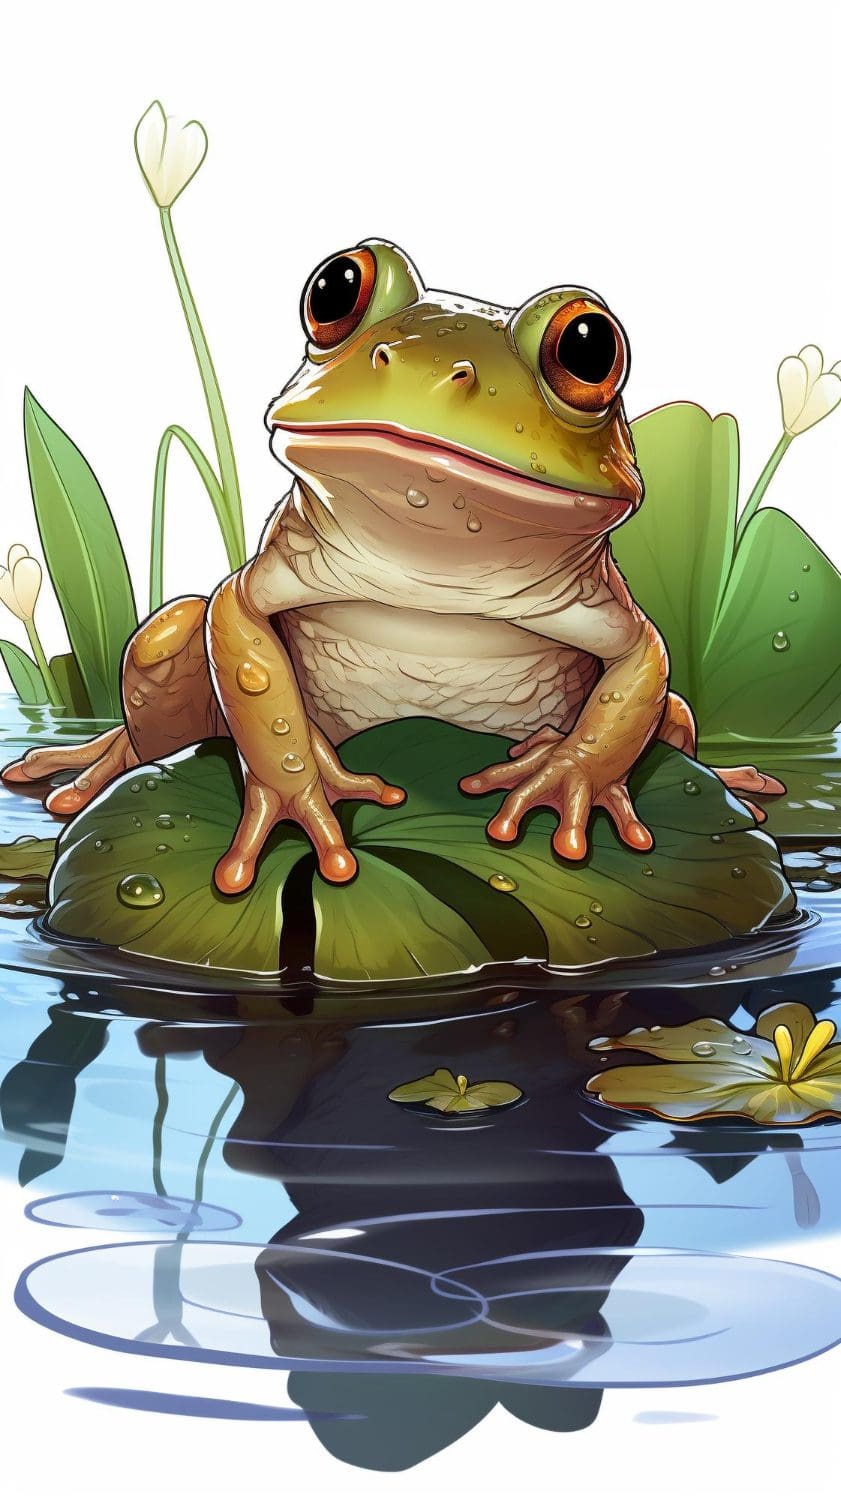 Cartoon graphic of a happy frog waving goodbye by the pond.